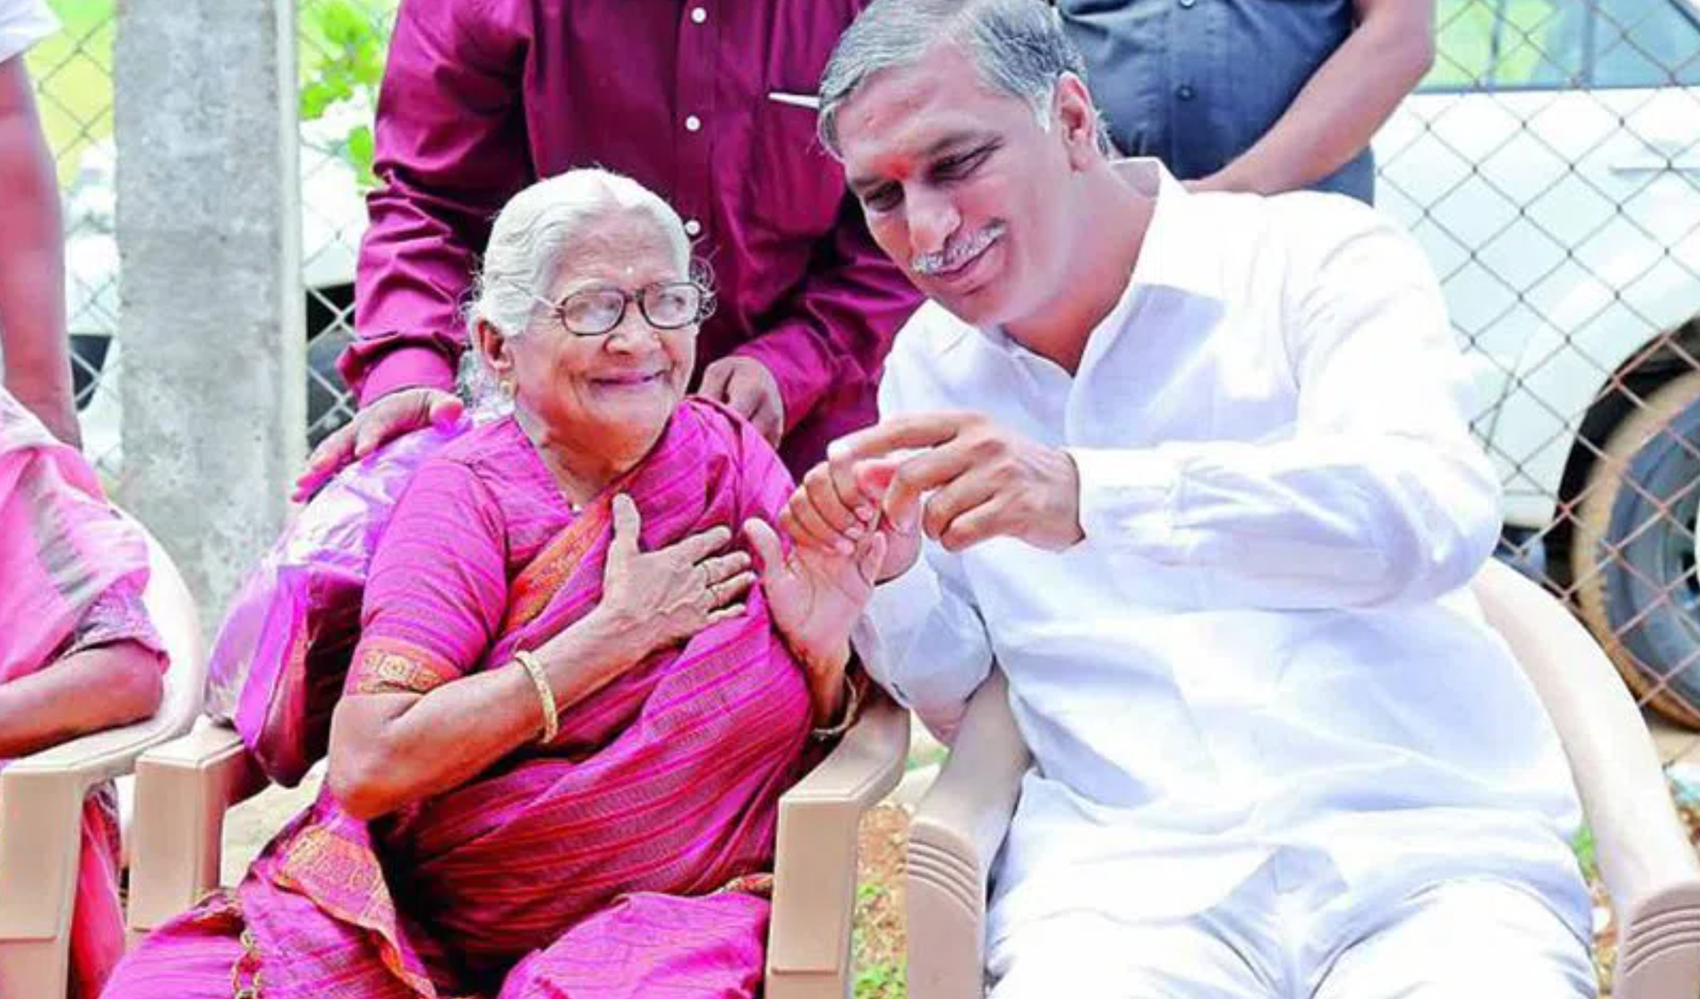 the State government has decided to build a home for elderly persons in Siddipet town at a cost of Rs 1 crore.